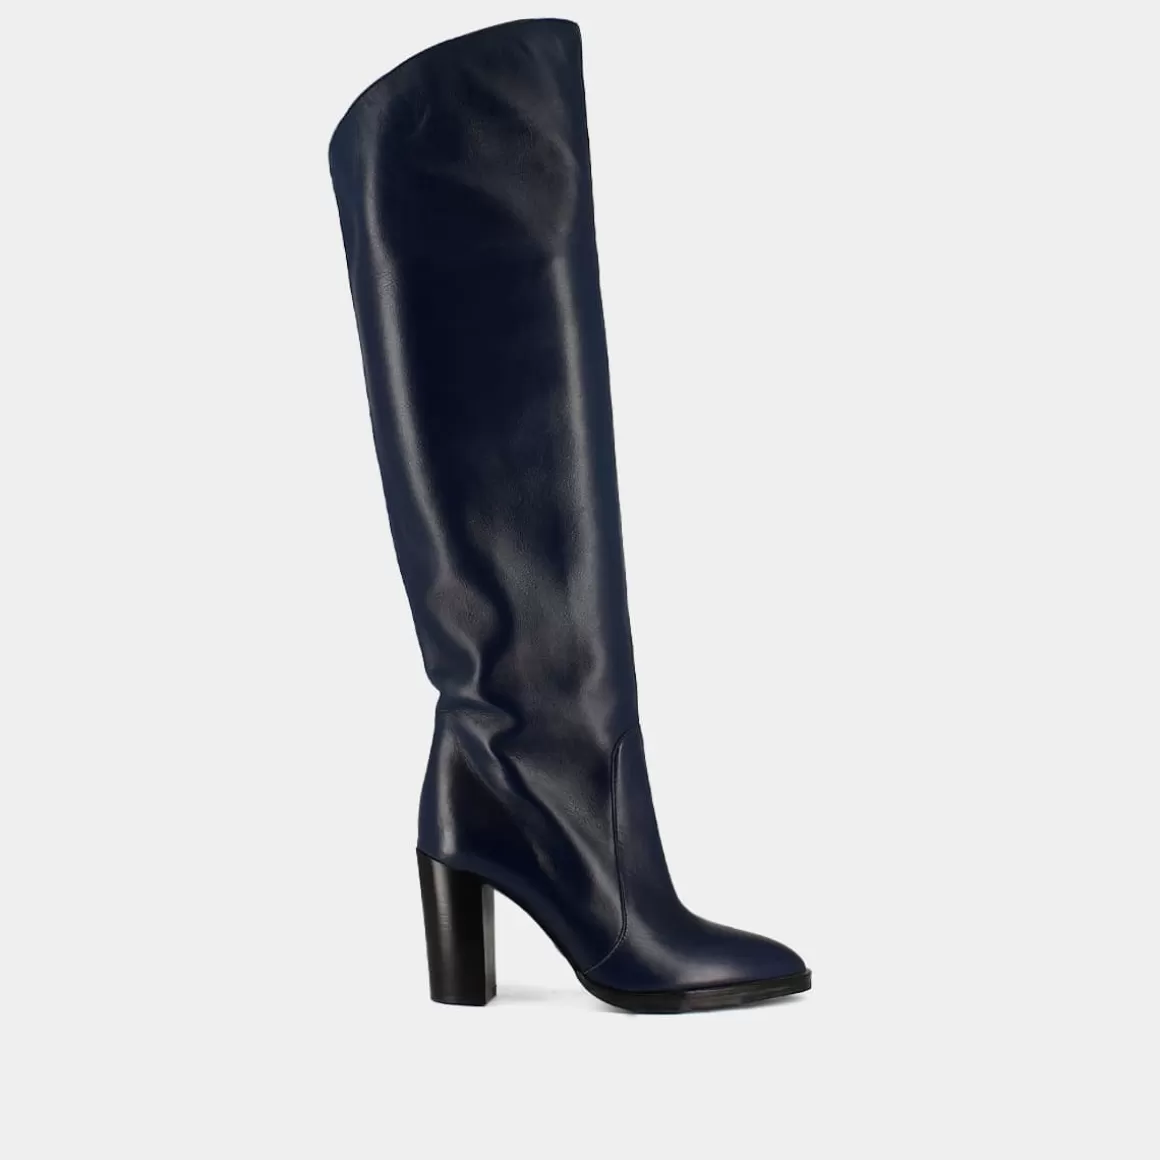 Pointed toe high boots<Jonak Outlet